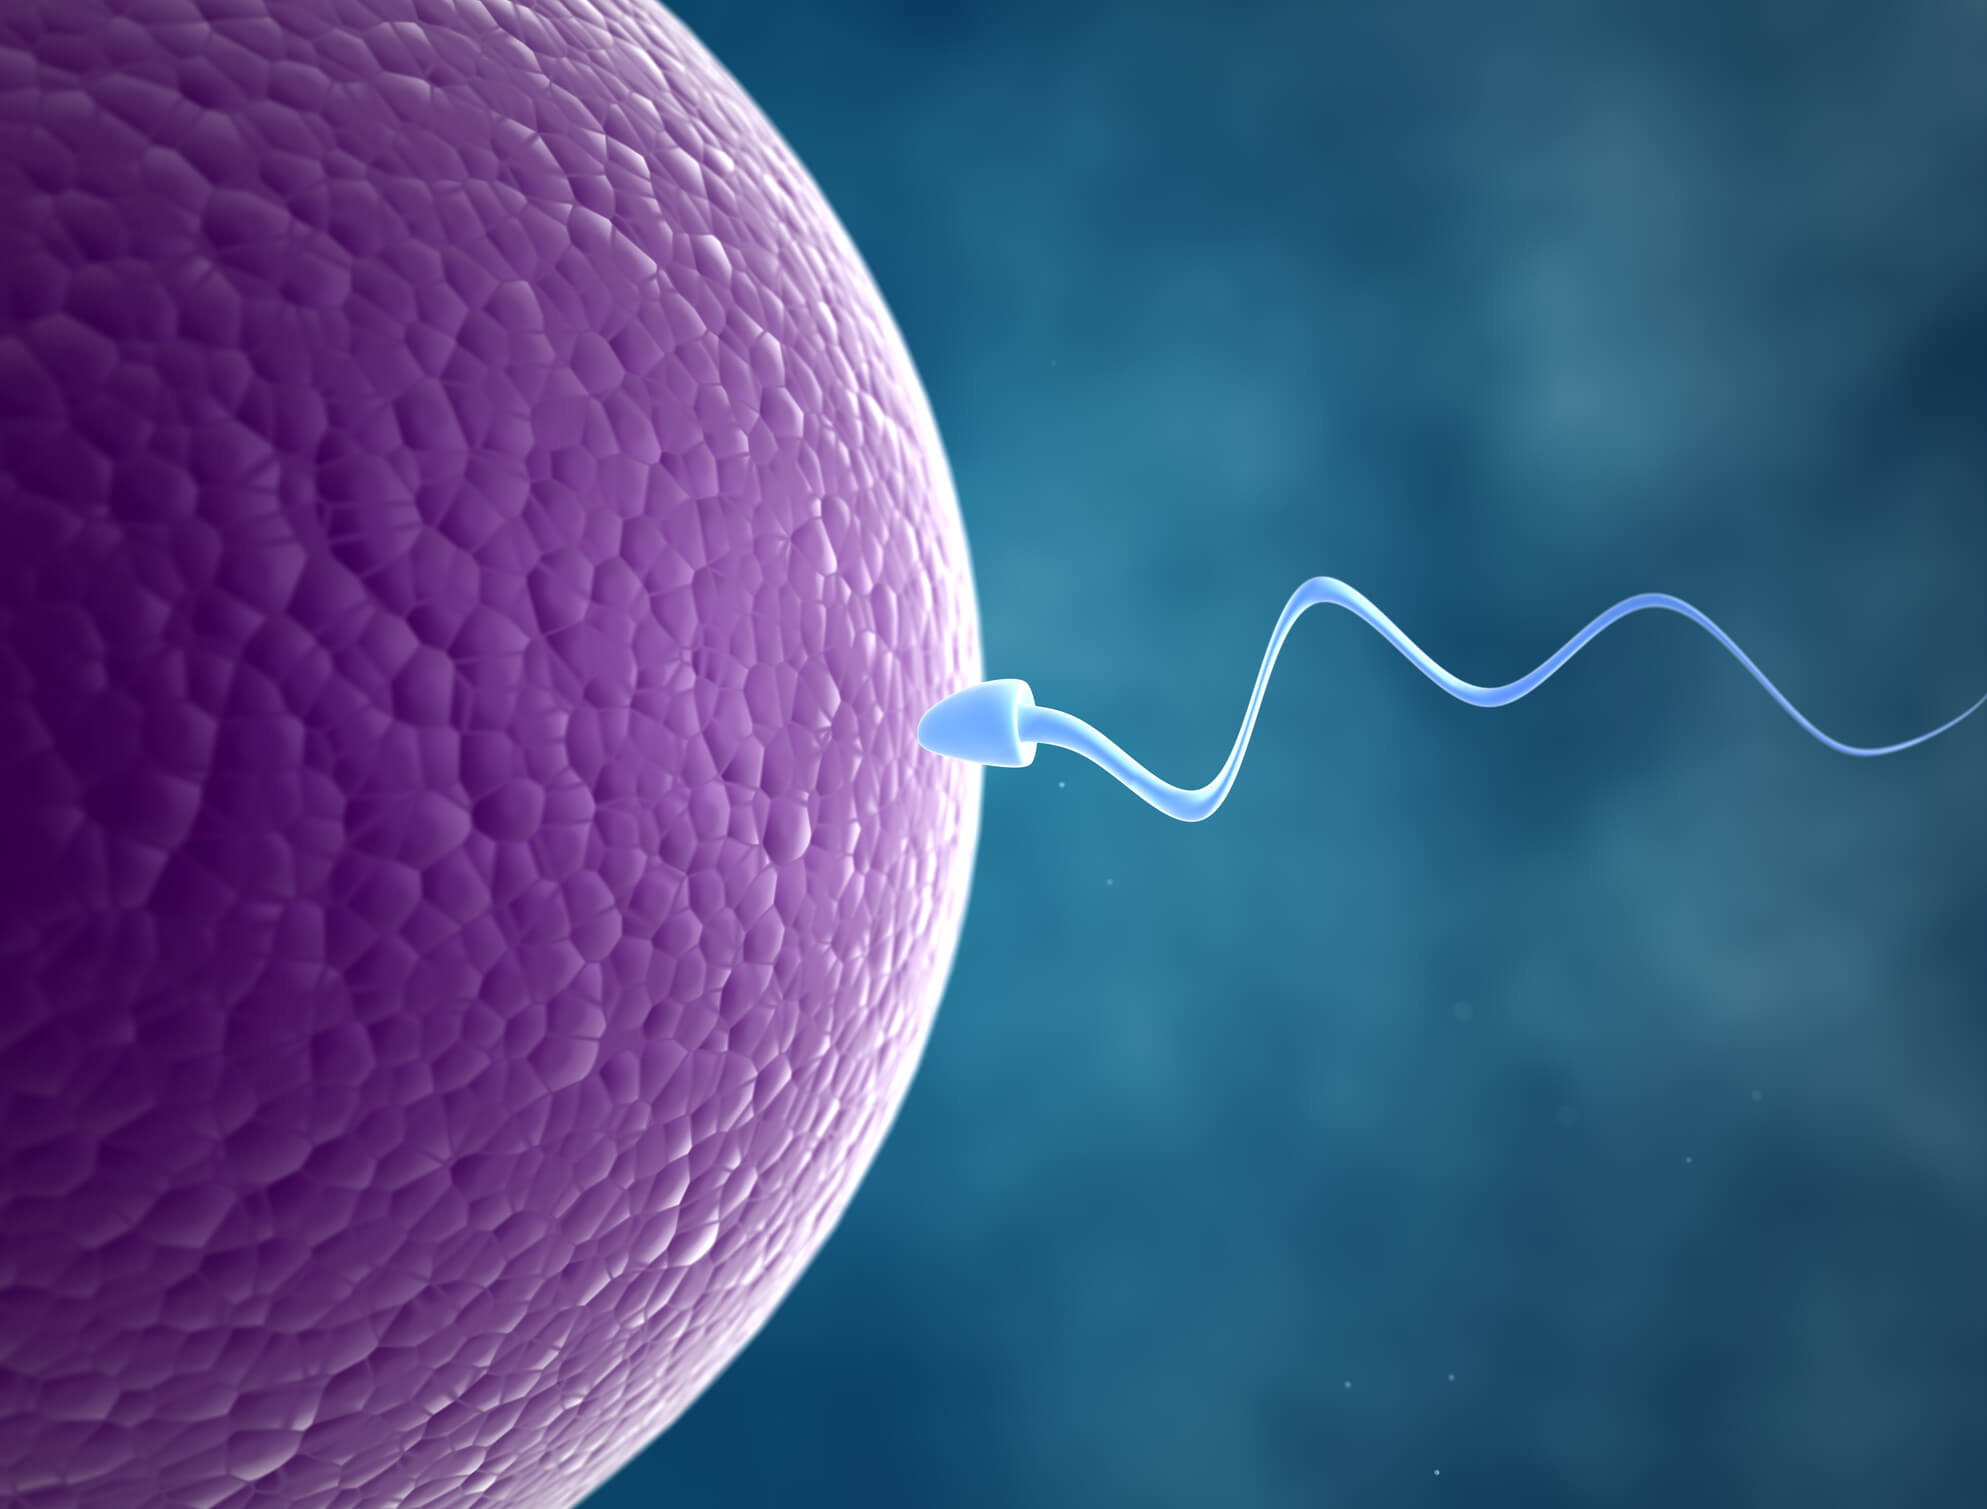 Increasing Fertility Tips - Sperm and Human Egg